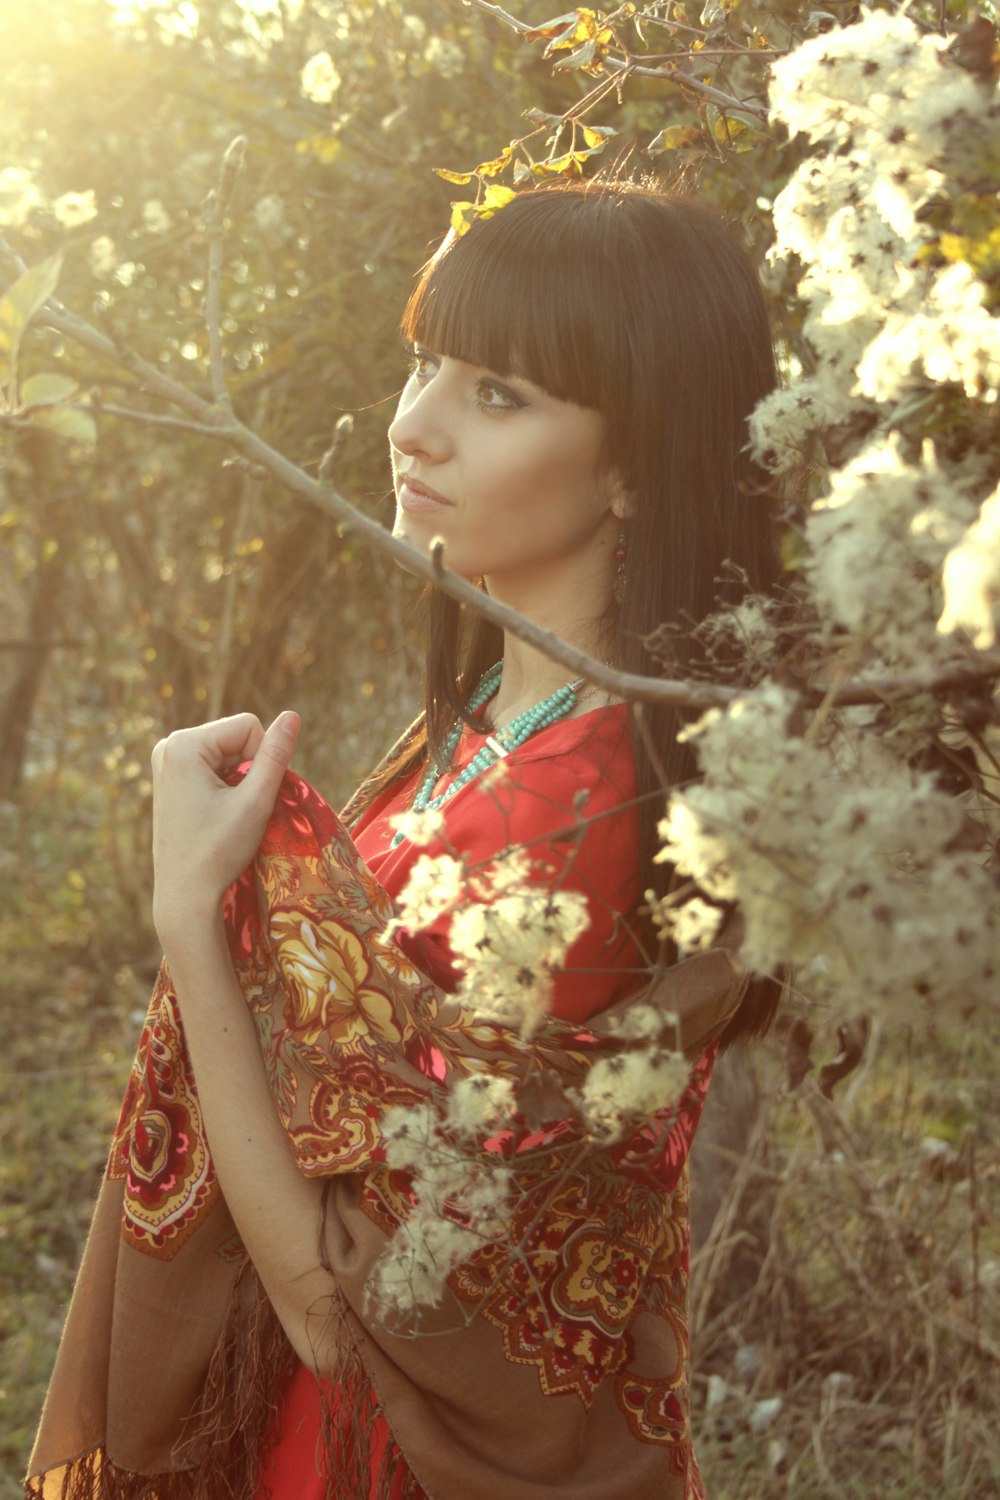 woman in red and white floral dress standing near brown leaf tree during daytime